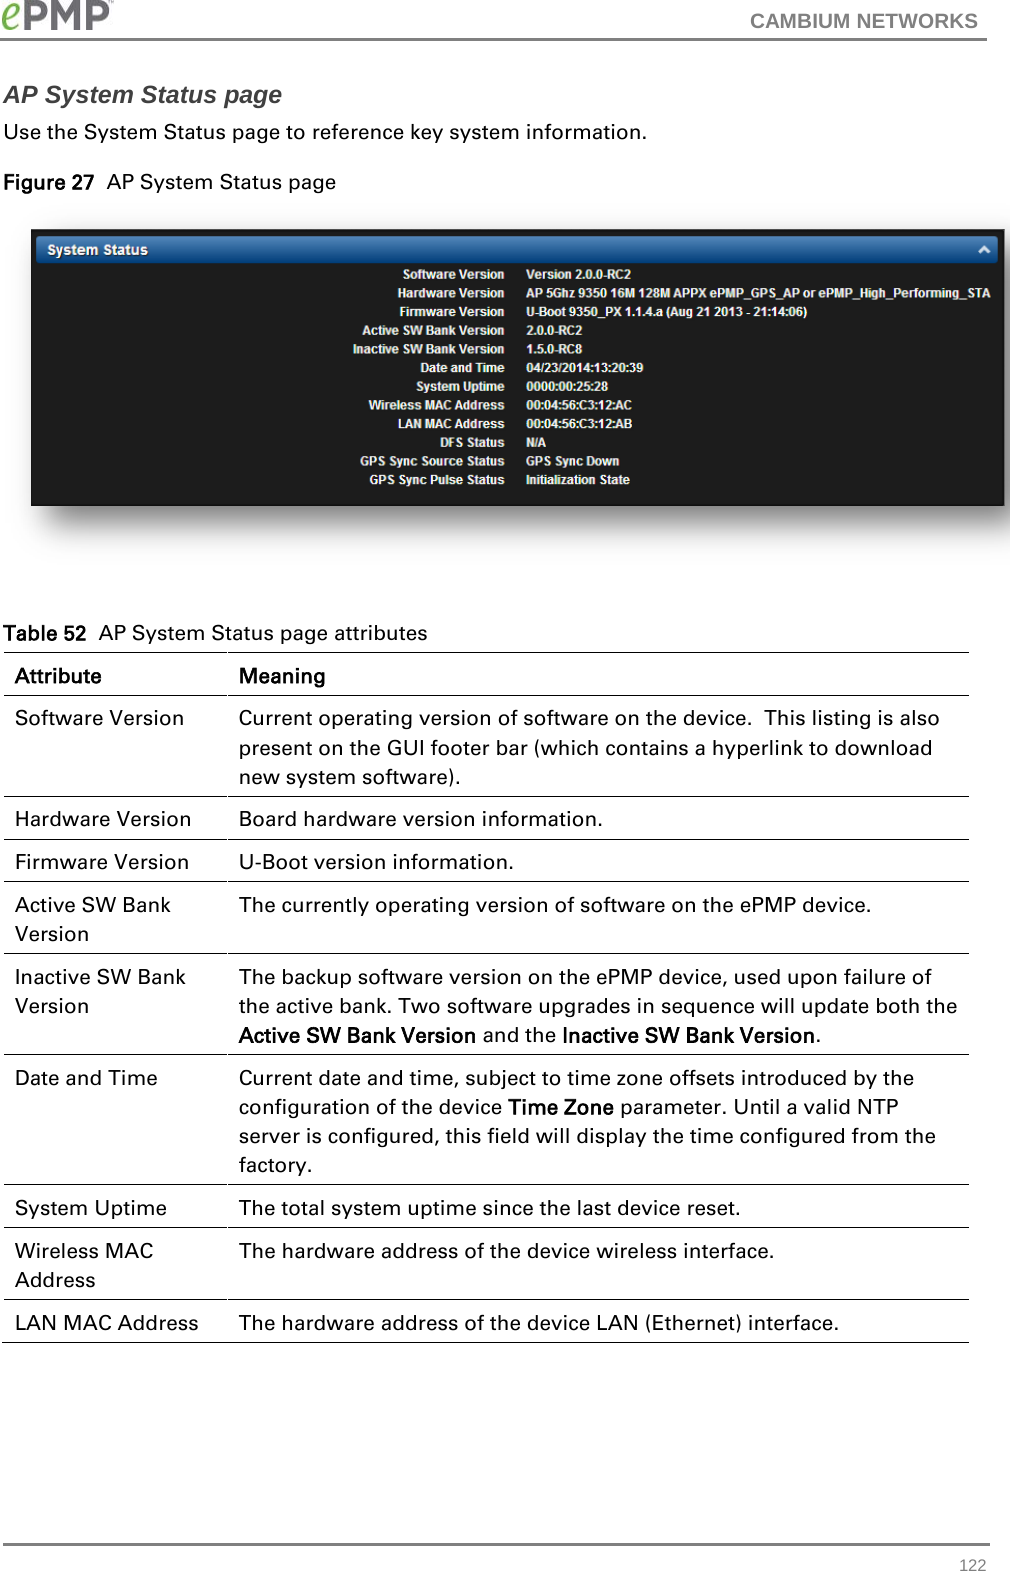 CAMBIUM NETWORKS  AP System Status page Use the System Status page to reference key system information. Figure 27  AP System Status page   Table 52  AP System Status page attributes Attribute Meaning Software Version Current operating version of software on the device.  This listing is also present on the GUI footer bar (which contains a hyperlink to download new system software). Hardware Version Board hardware version information. Firmware Version  U-Boot version information. Active SW Bank Version The currently operating version of software on the ePMP device. Inactive SW Bank Version The backup software version on the ePMP device, used upon failure of the active bank. Two software upgrades in sequence will update both the Active SW Bank Version and the Inactive SW Bank Version. Date and Time Current date and time, subject to time zone offsets introduced by the configuration of the device Time Zone parameter. Until a valid NTP server is configured, this field will display the time configured from the factory. System Uptime The total system uptime since the last device reset. Wireless MAC Address The hardware address of the device wireless interface. LAN MAC Address The hardware address of the device LAN (Ethernet) interface.  122 